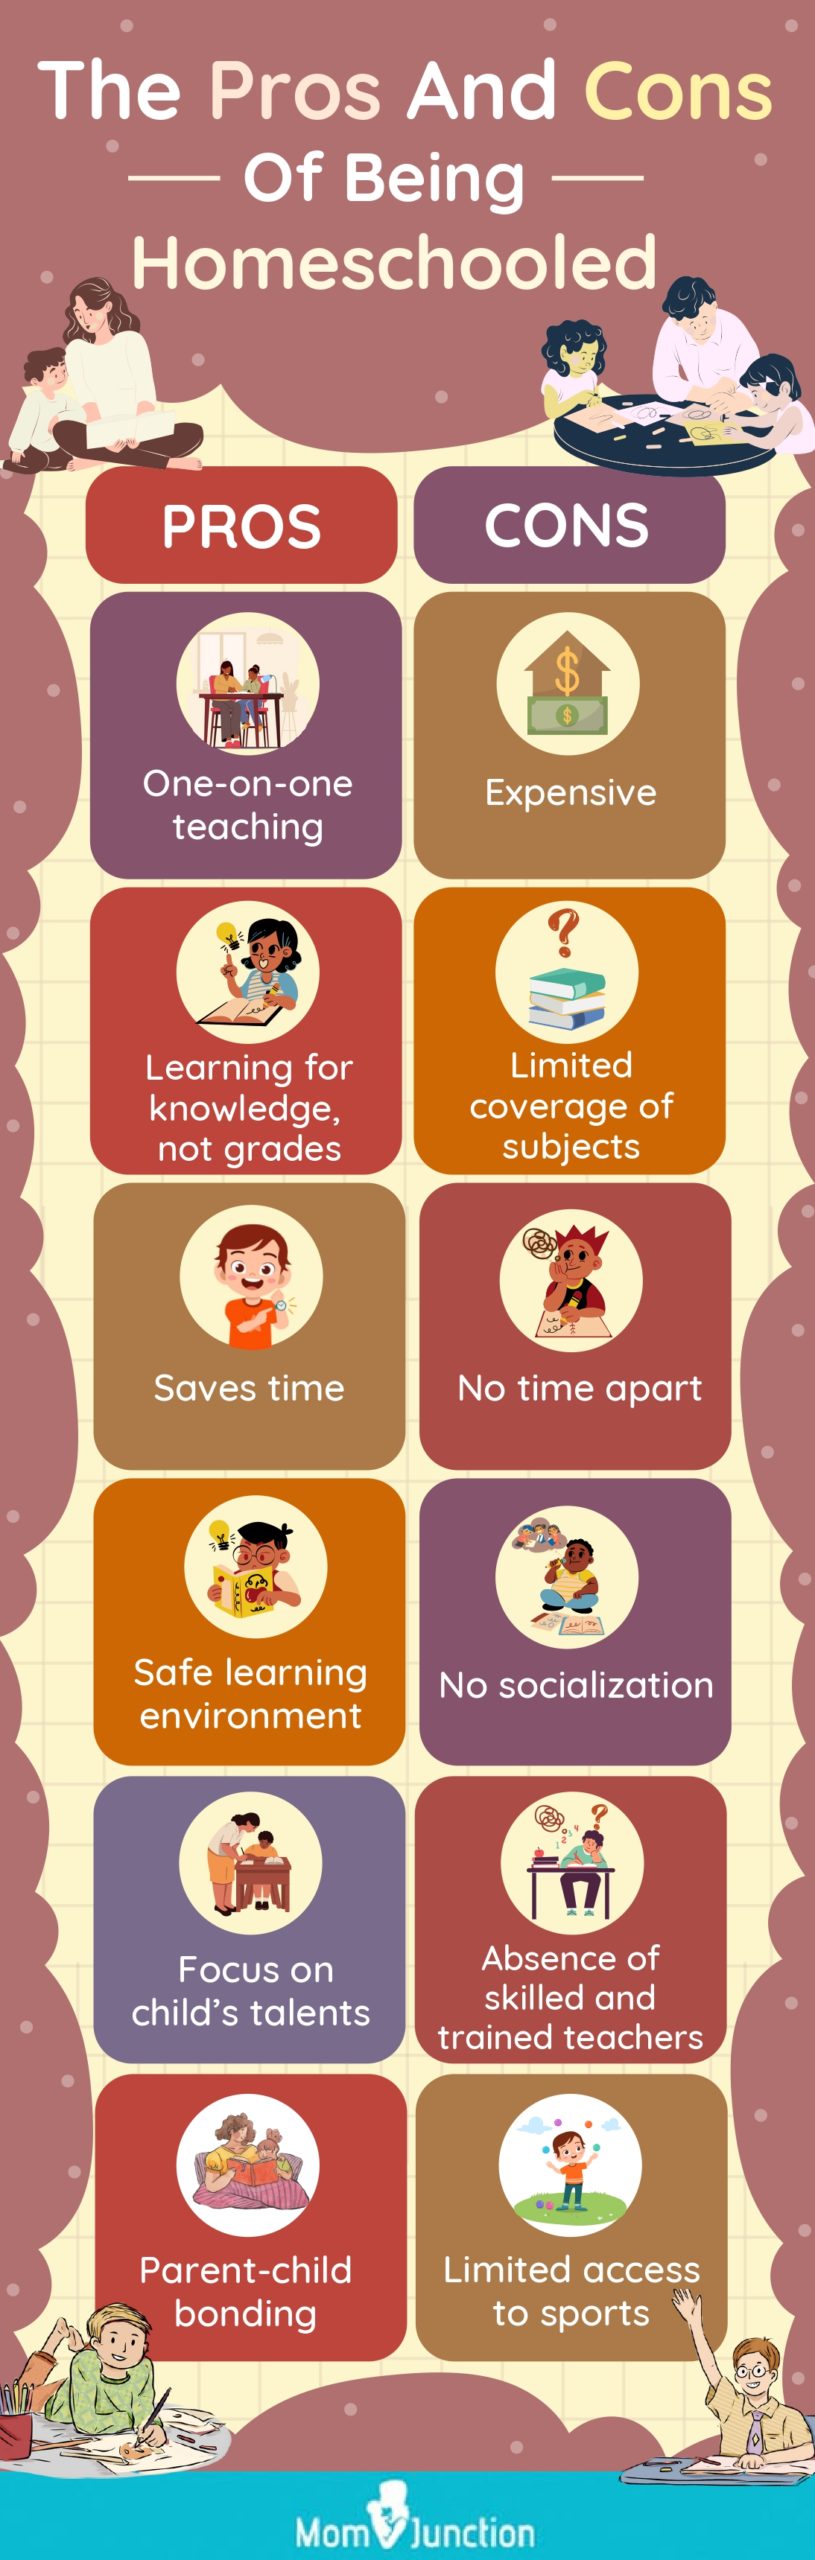 the pros and cons of being homeschooled [infographic]